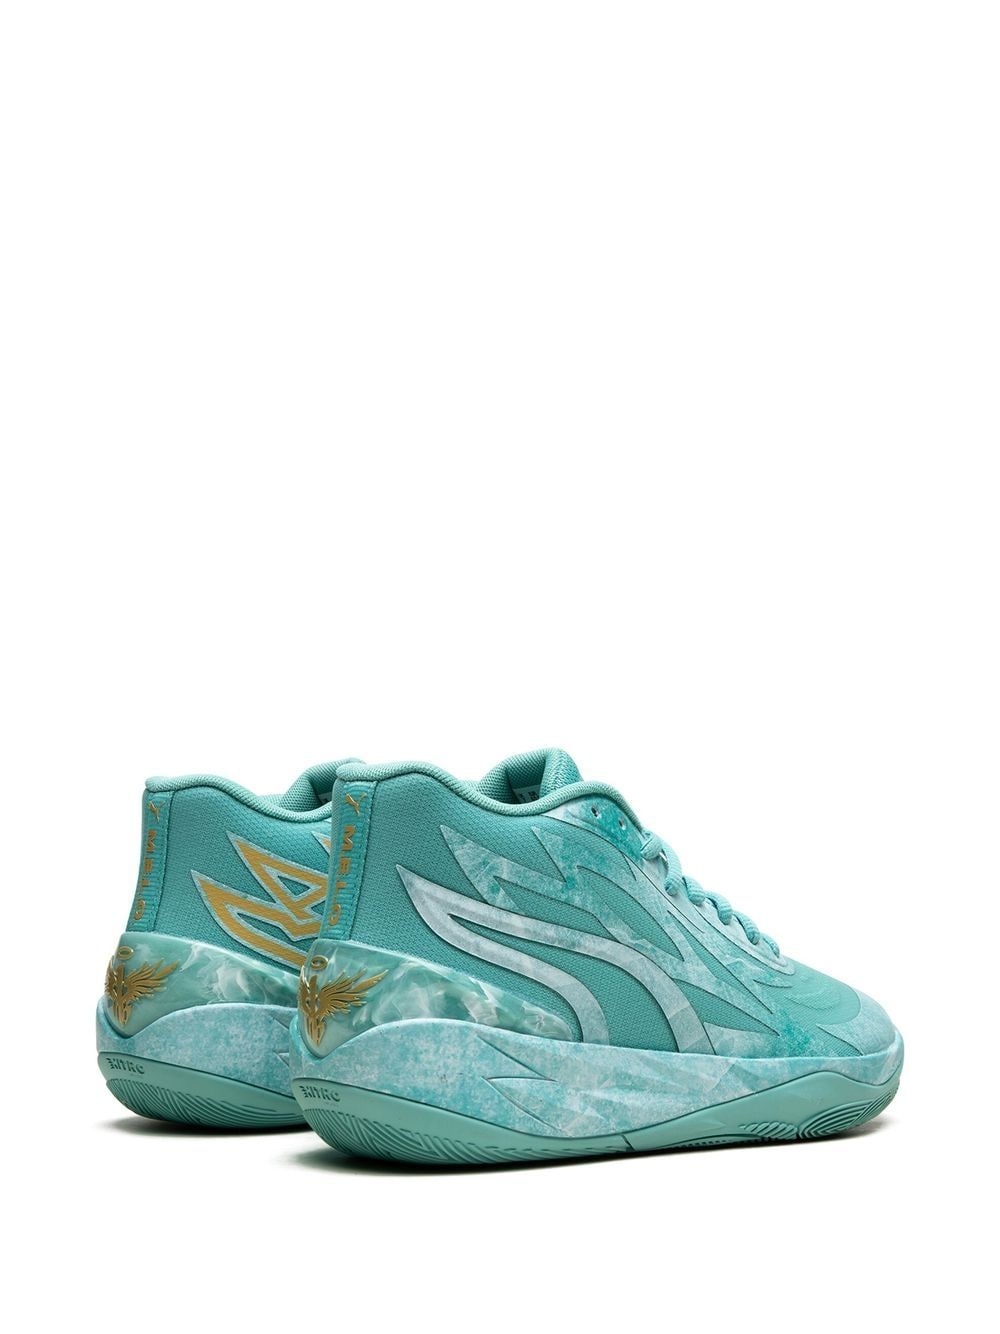 x LaMelo Ball MB.02 "Lunar New Year" sneakers - 3